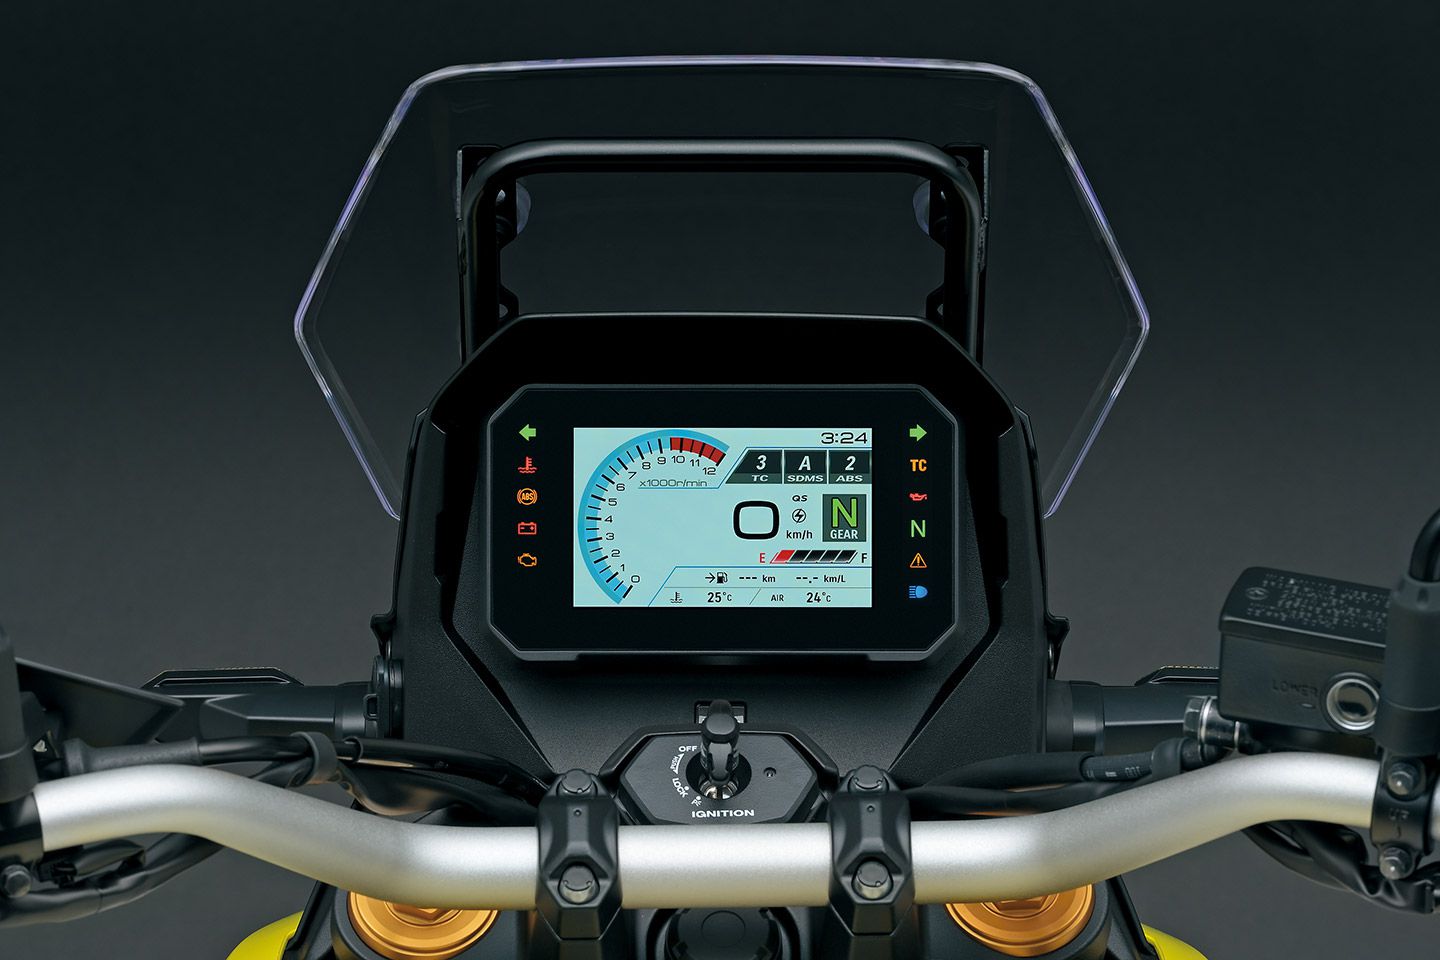 A 5-inch TFT display is a welcome addition to the V-Strom lineup.